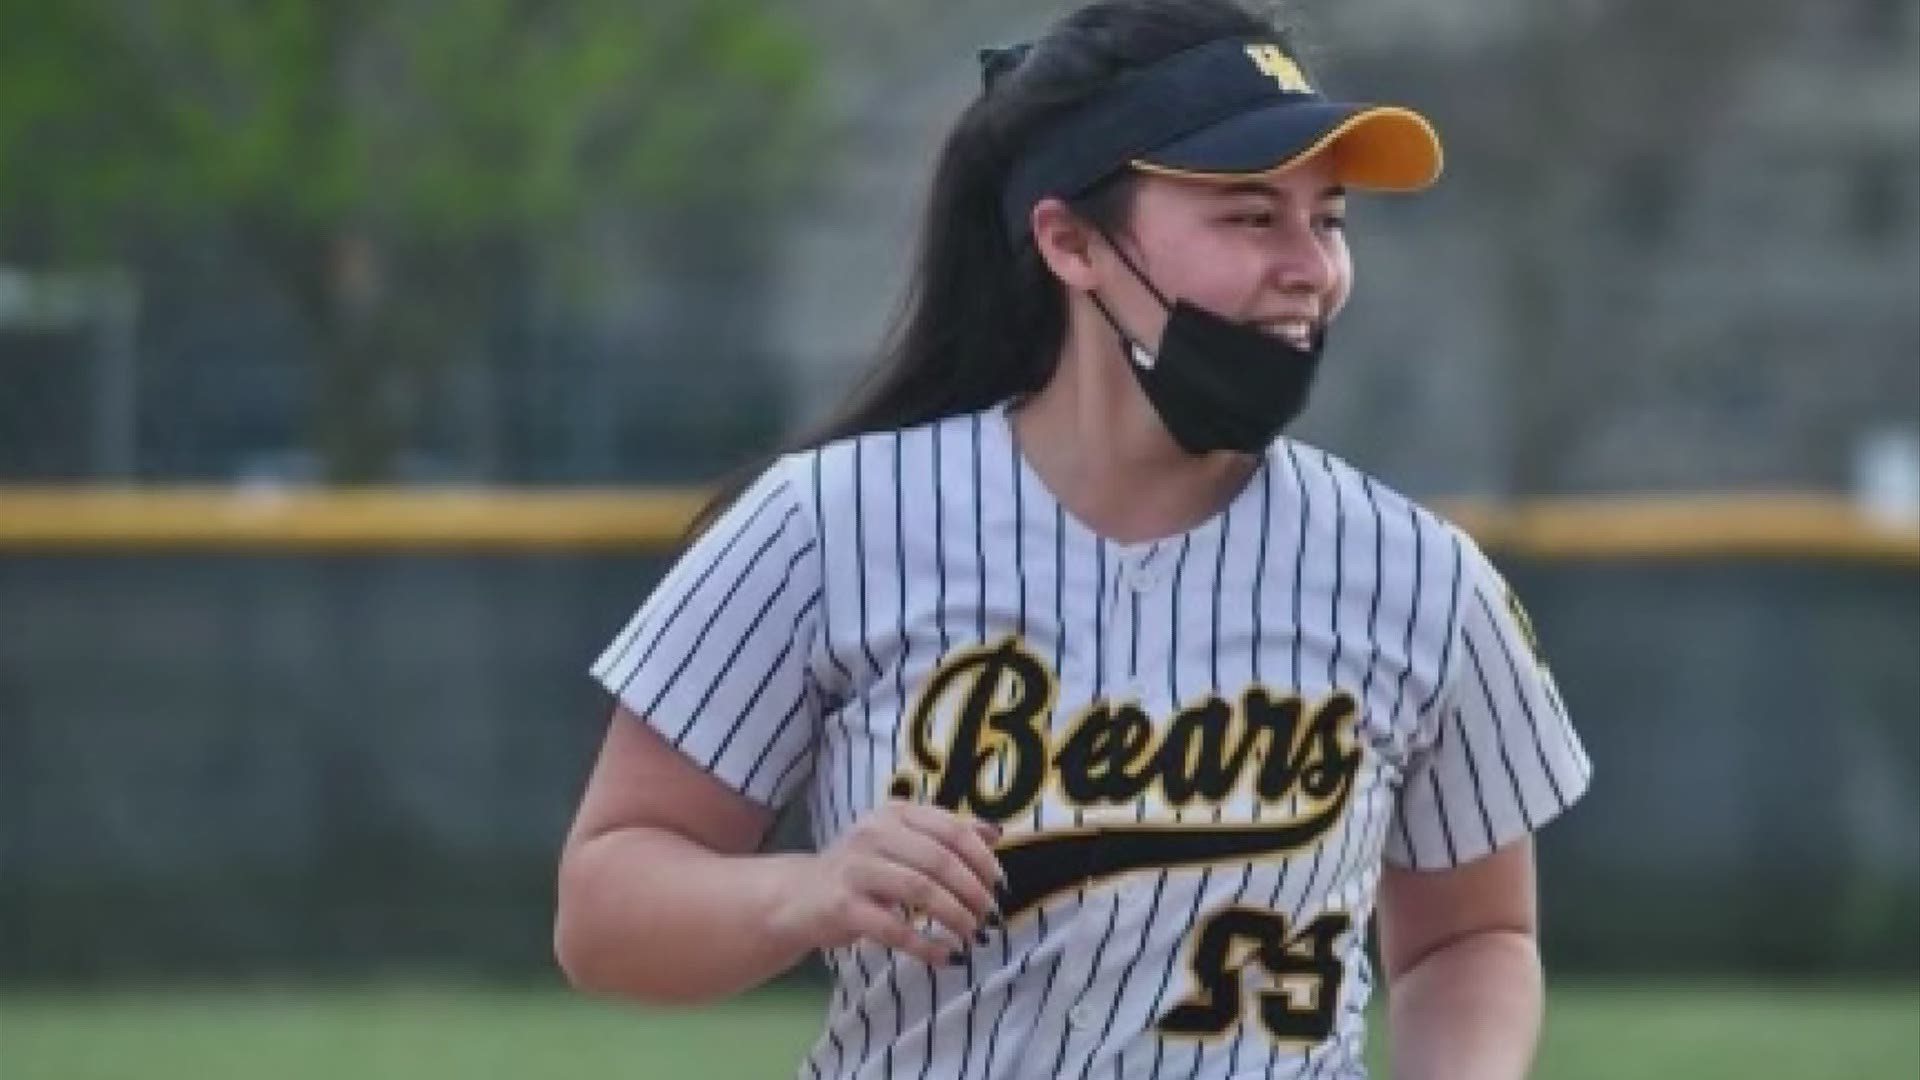 Maxine McCraw is a straight-A student at Upper Arlington High School where she is also a team captain for the softball team.